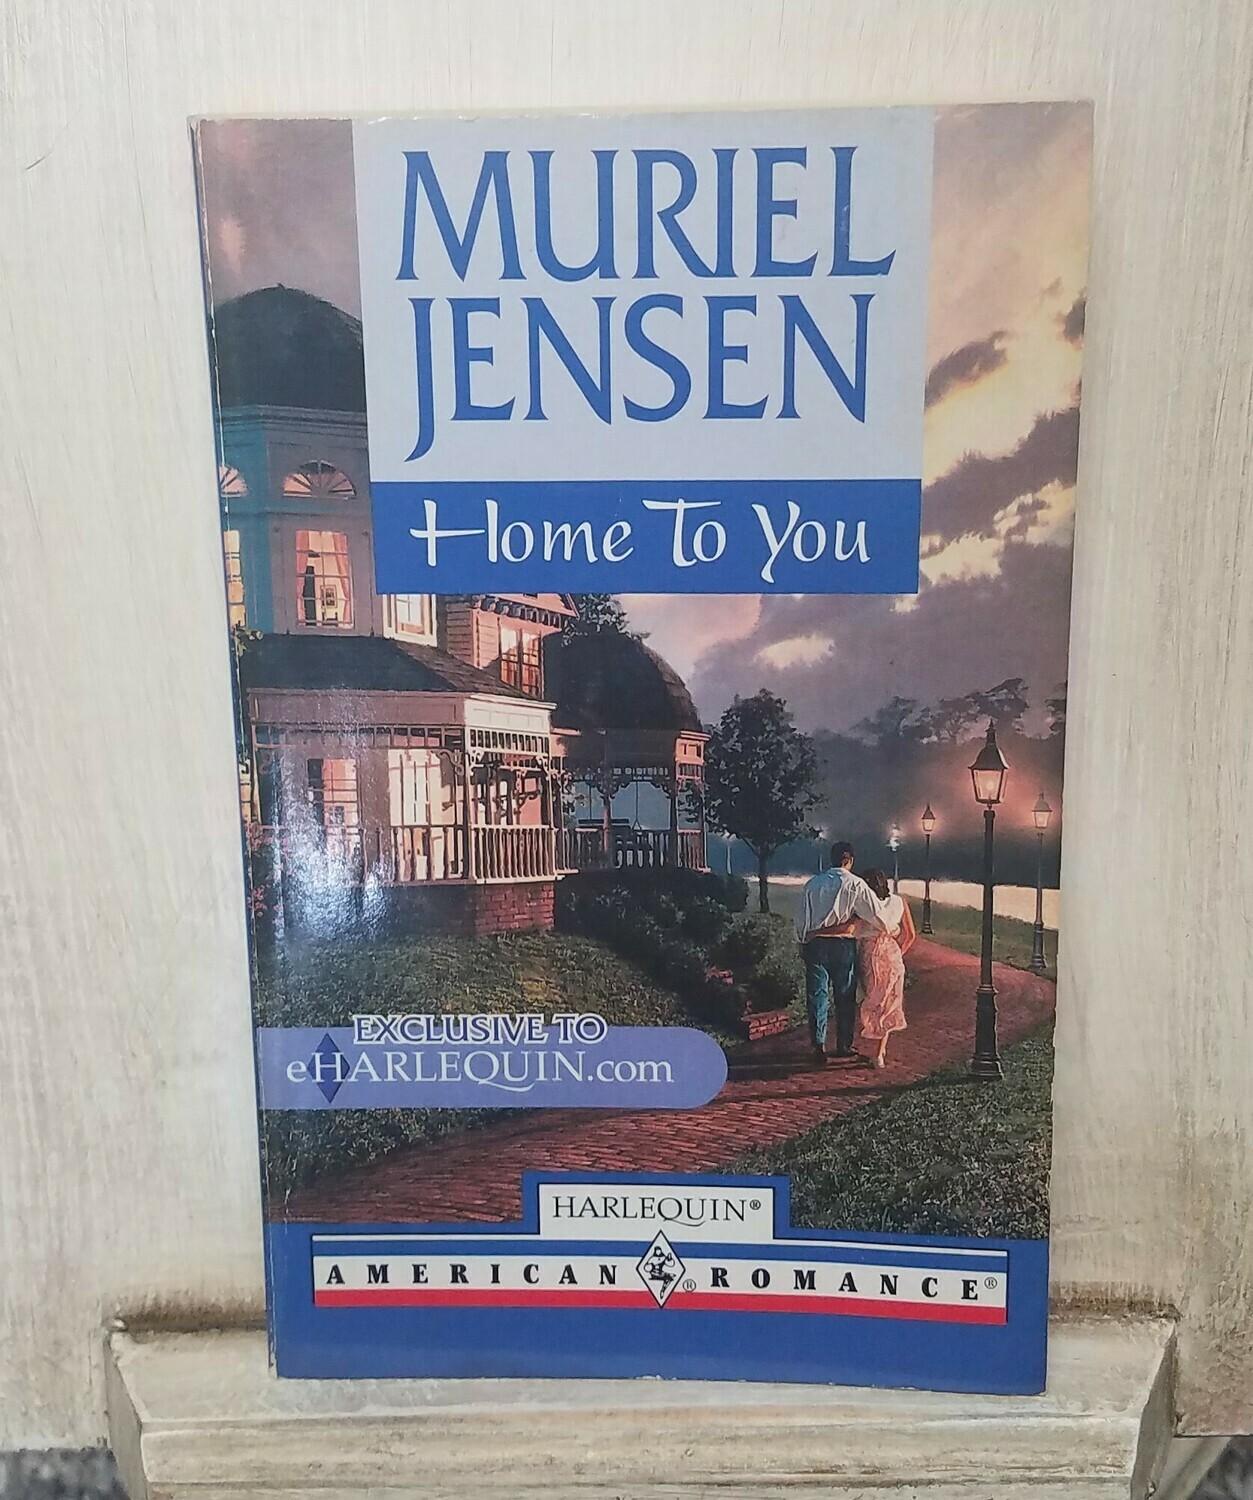 Home To You by Muriel Jensen